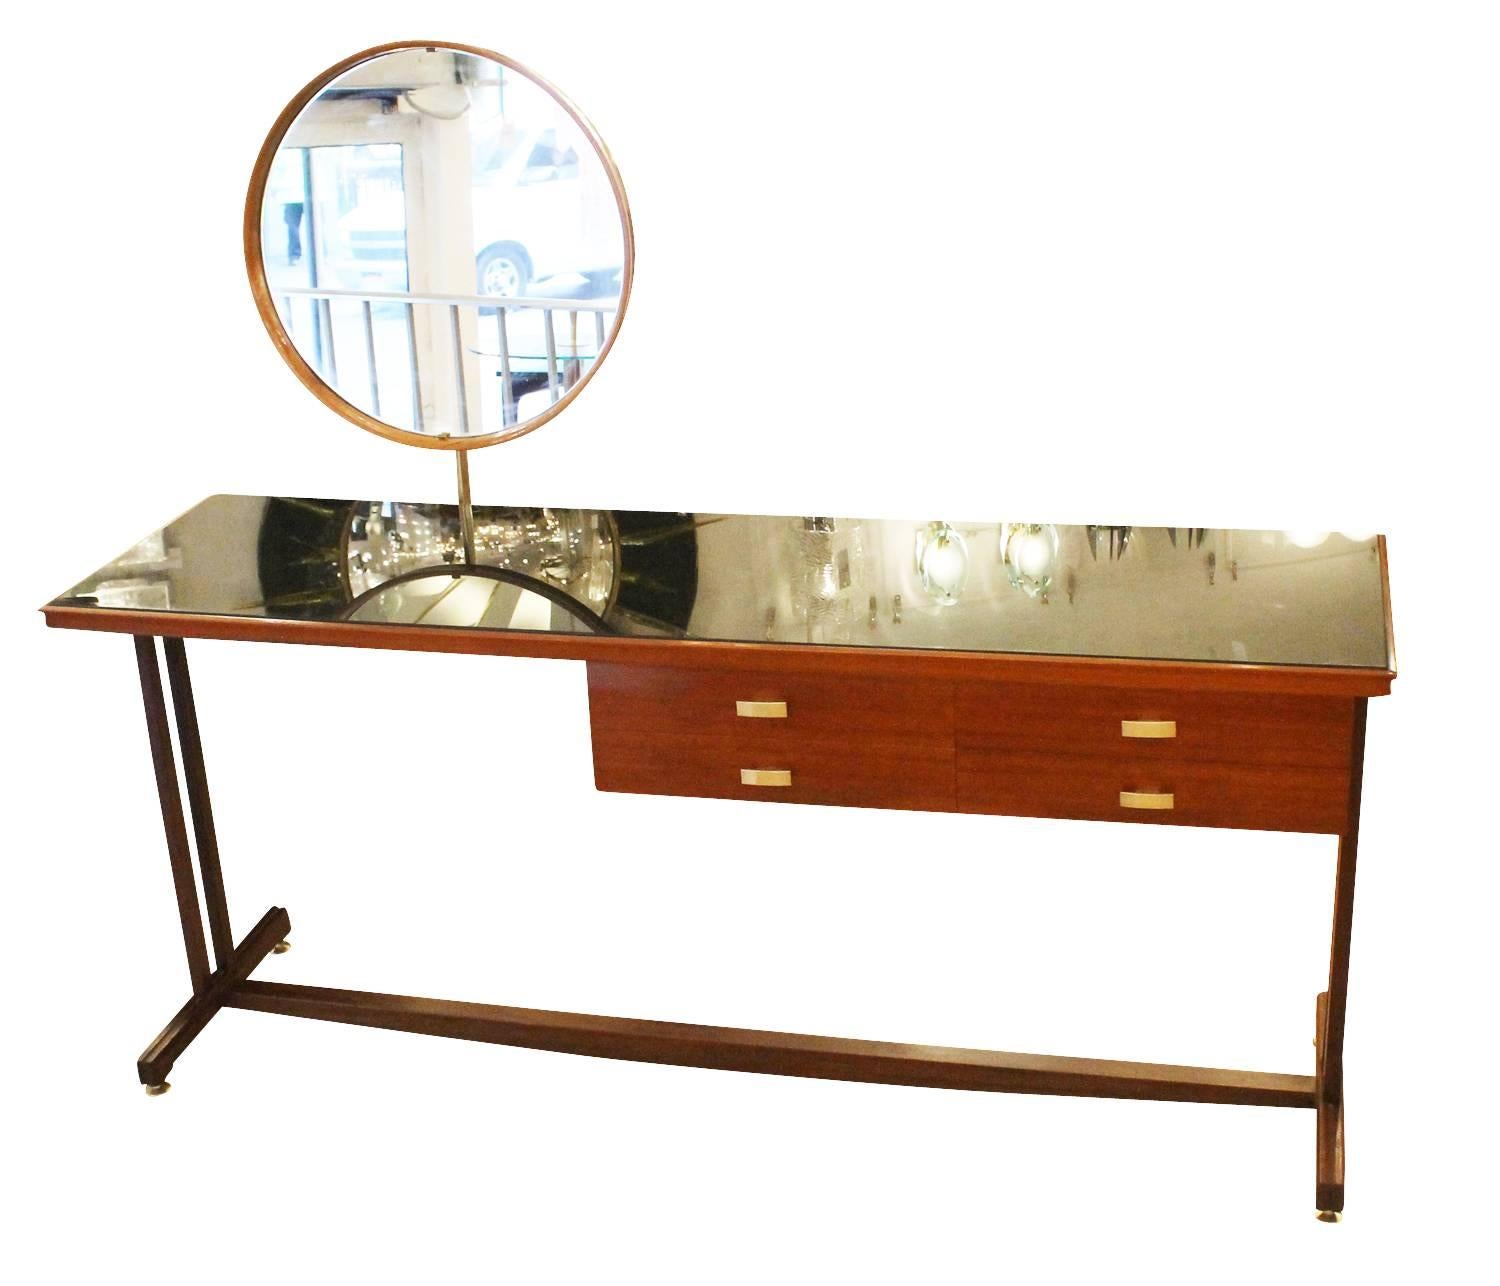 Beautiful Mid-Century wood vanity with a black glass top, round adjustable mirror and brass details. The mirror can be removed so that it can be used as a narrow desk. Color of finish can be changed at an additional cost.